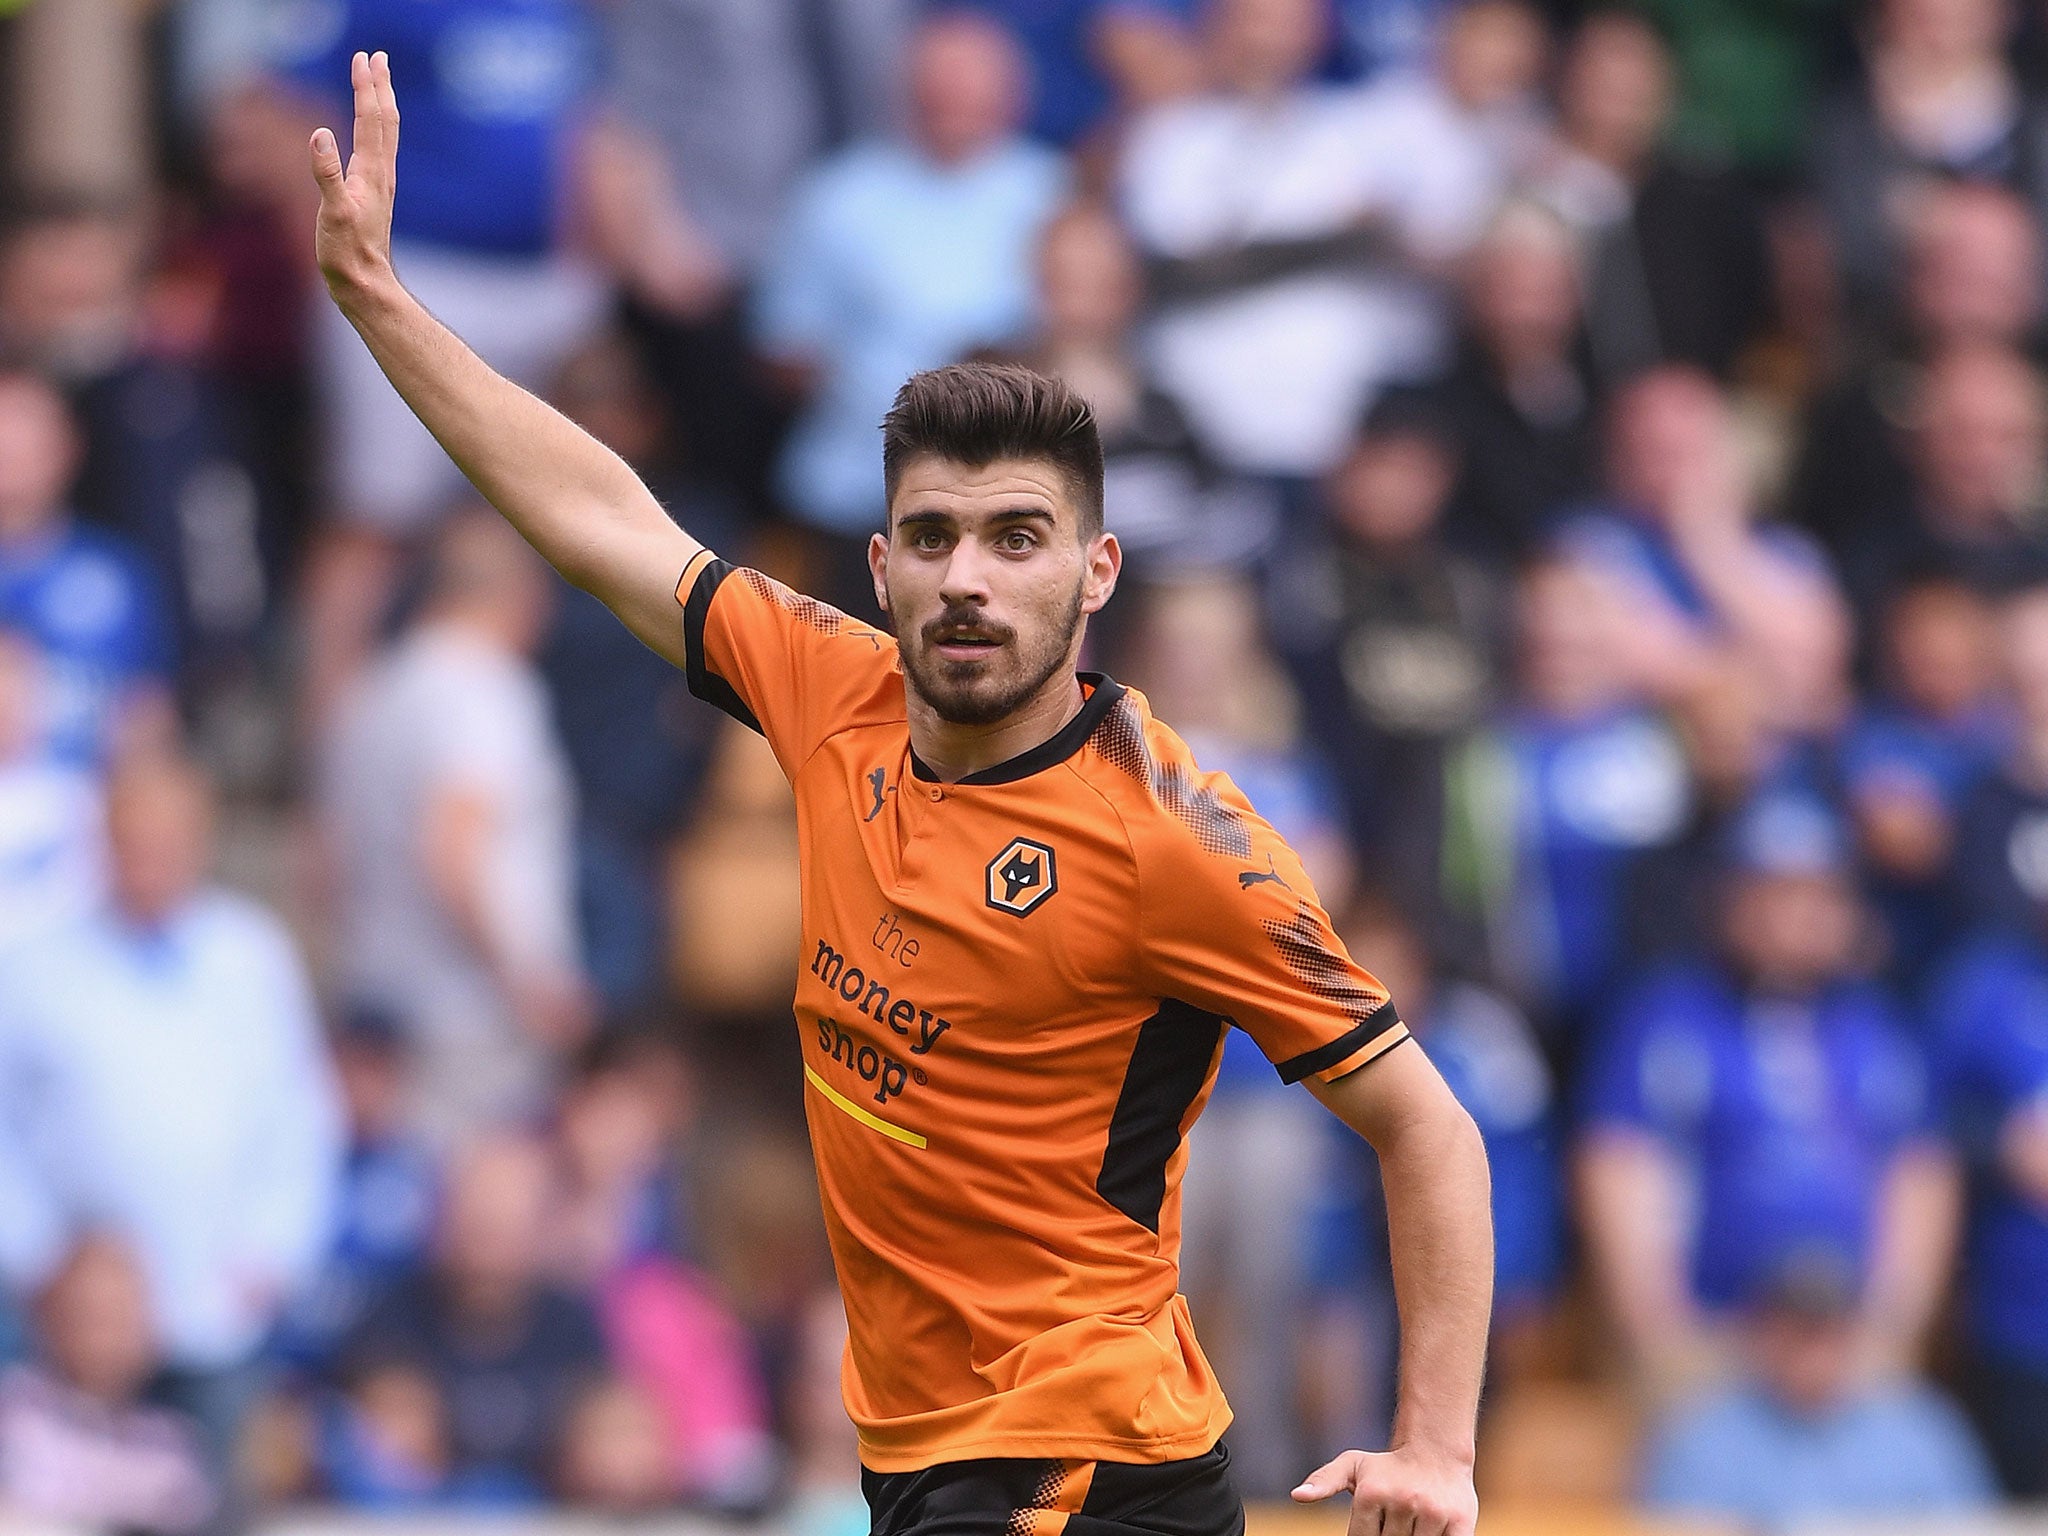 Ruben Neves joined Wolves this summer